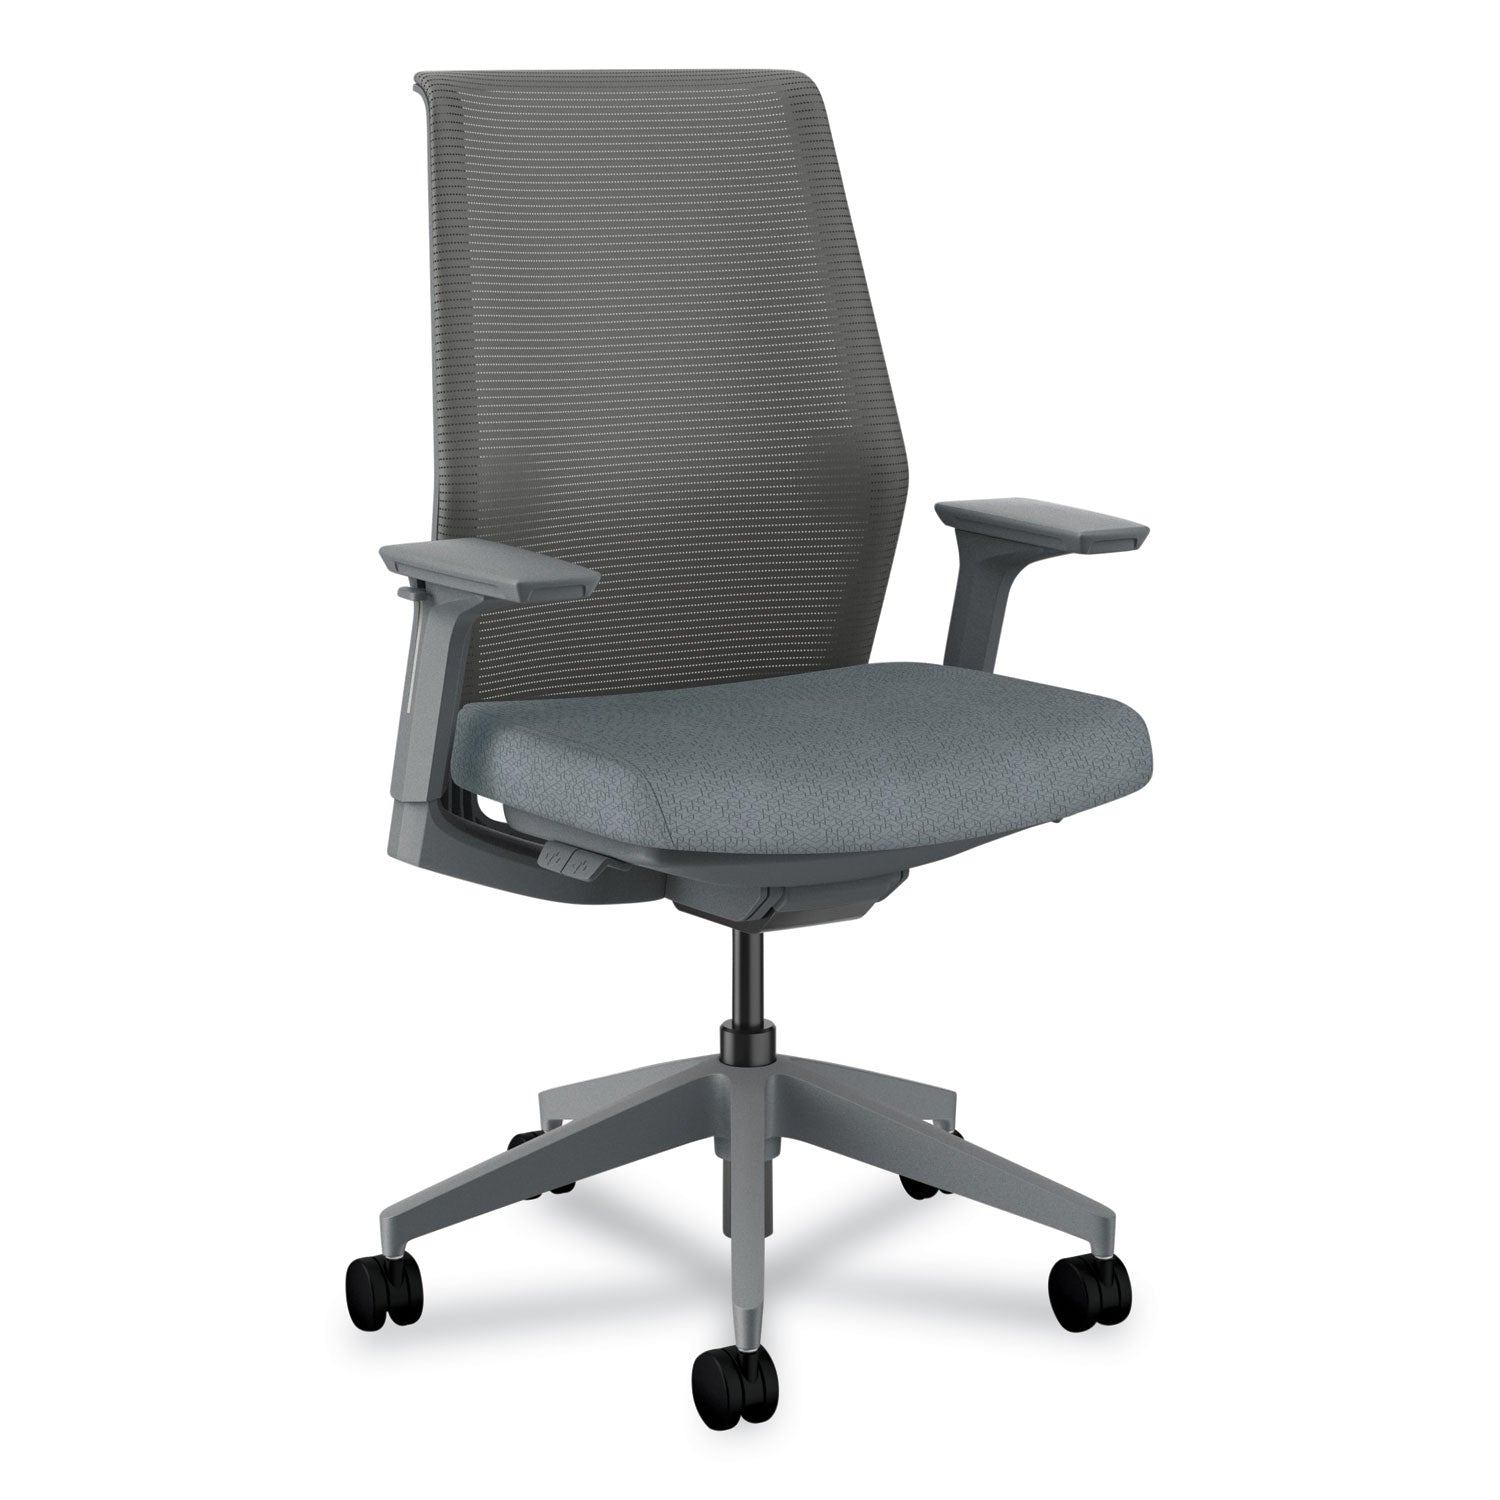 cipher-mesh-back-task-chair-supports-300-lb-15-to-20-seat-height-basalt-seat-charcoal-back-base-ships-in-7-10-bus-days_honcrthsca25lss - 1